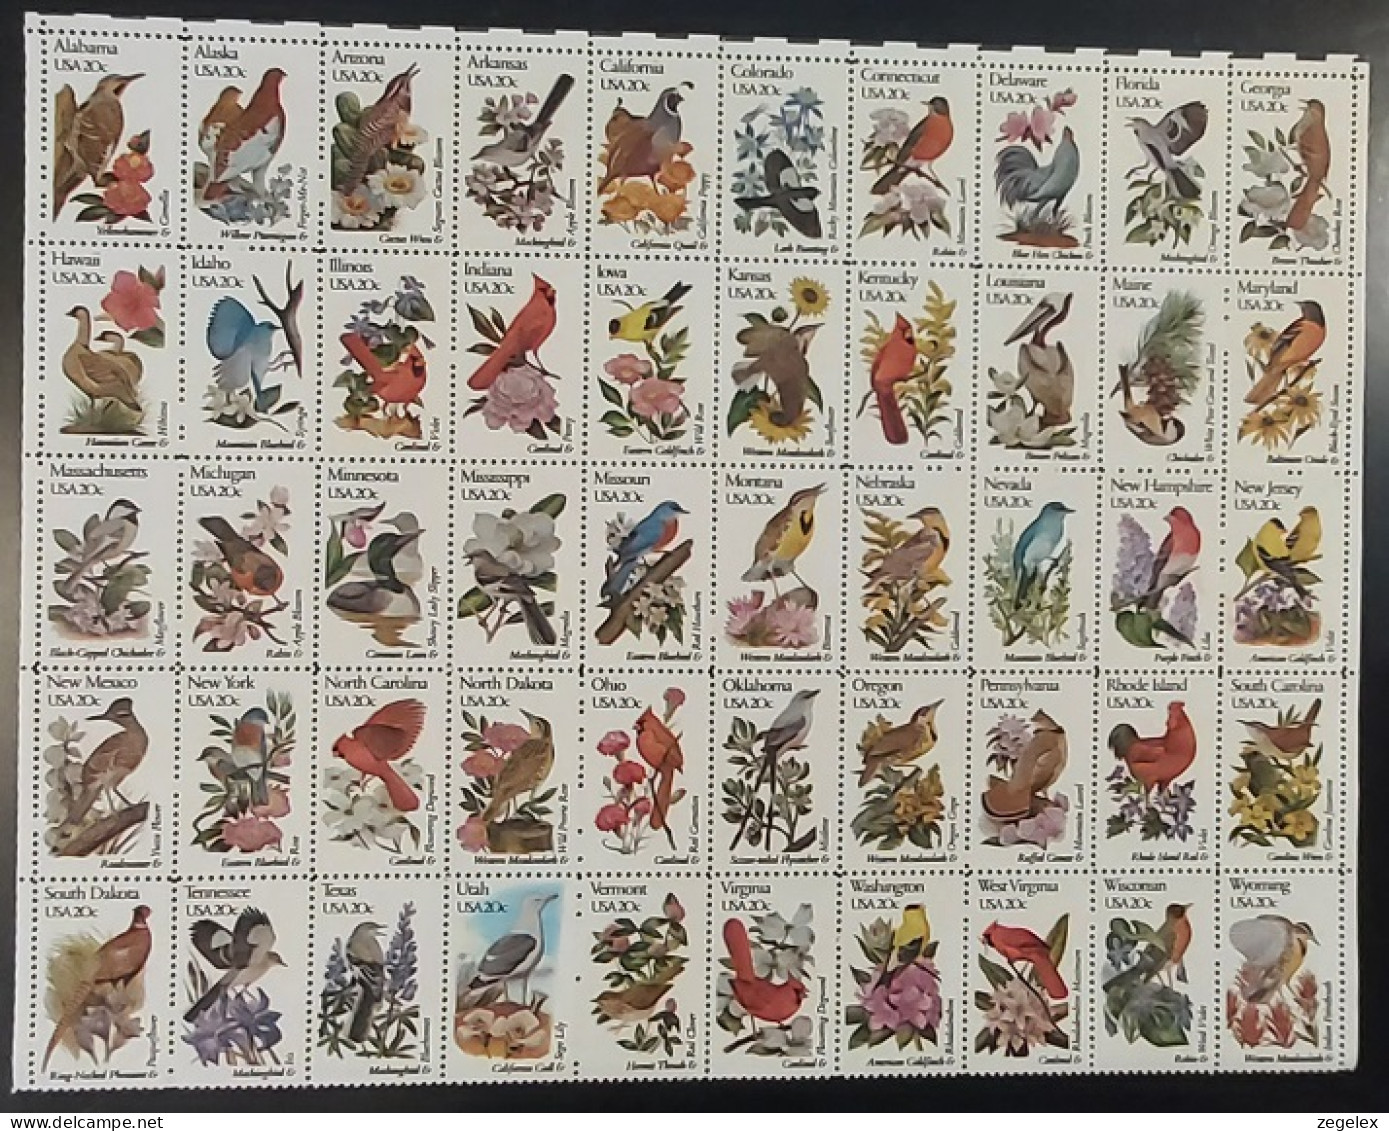 USA 1982 State Birds And Flowers. Sheet Perf 10,5x11,25  50 Values.  Scott No.1953-2002b. See Description - Hojas Completas